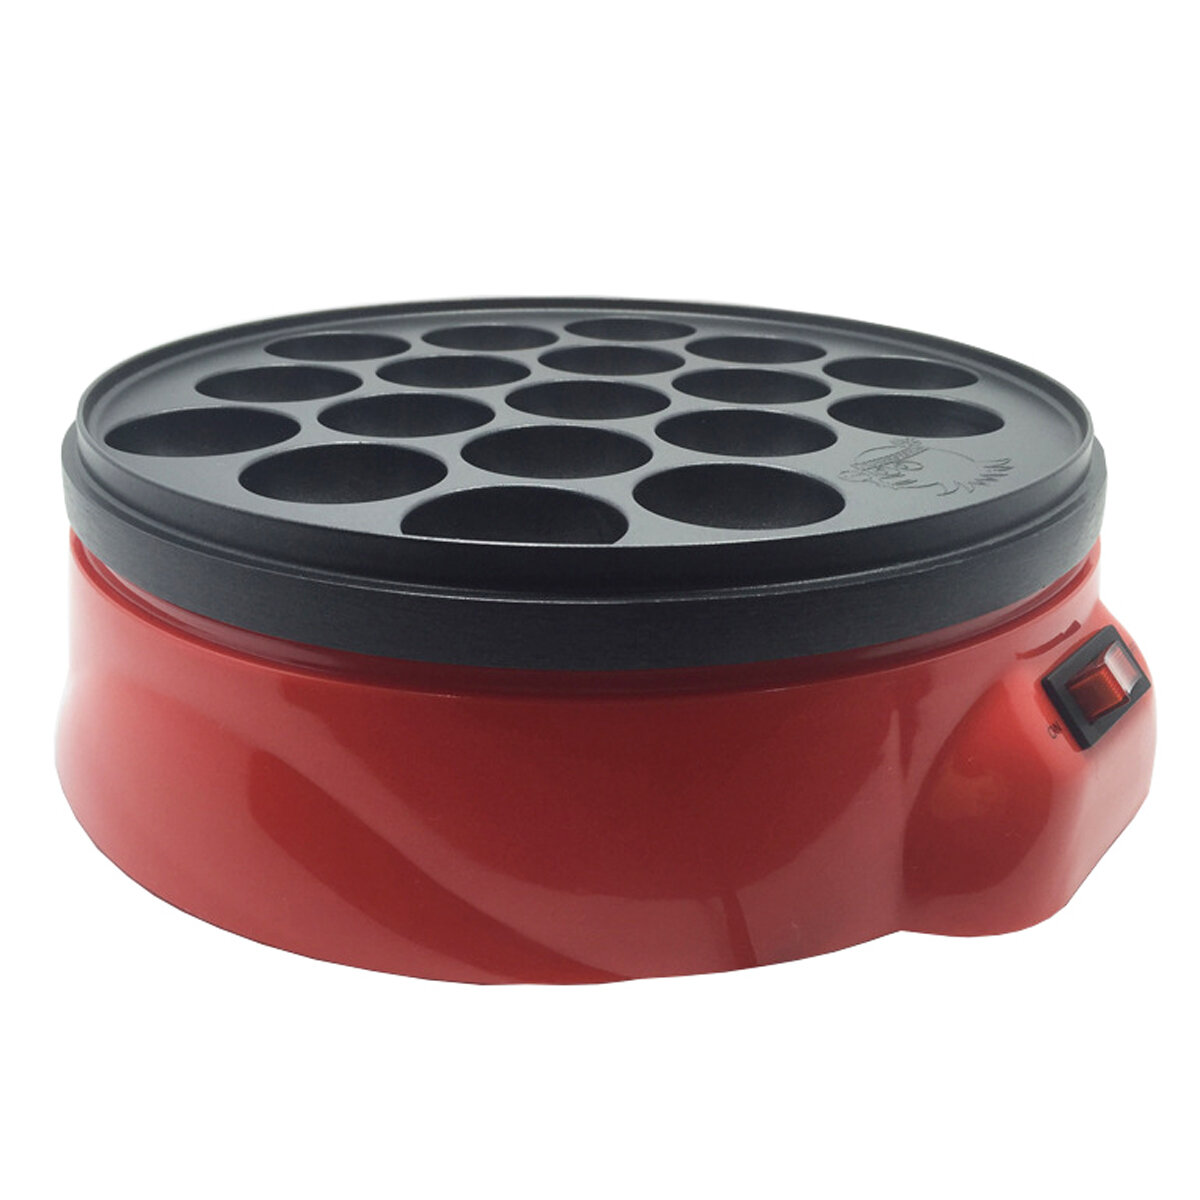 best price,holes,takoyaki,grill,pan,cooking,plate,650w,discount